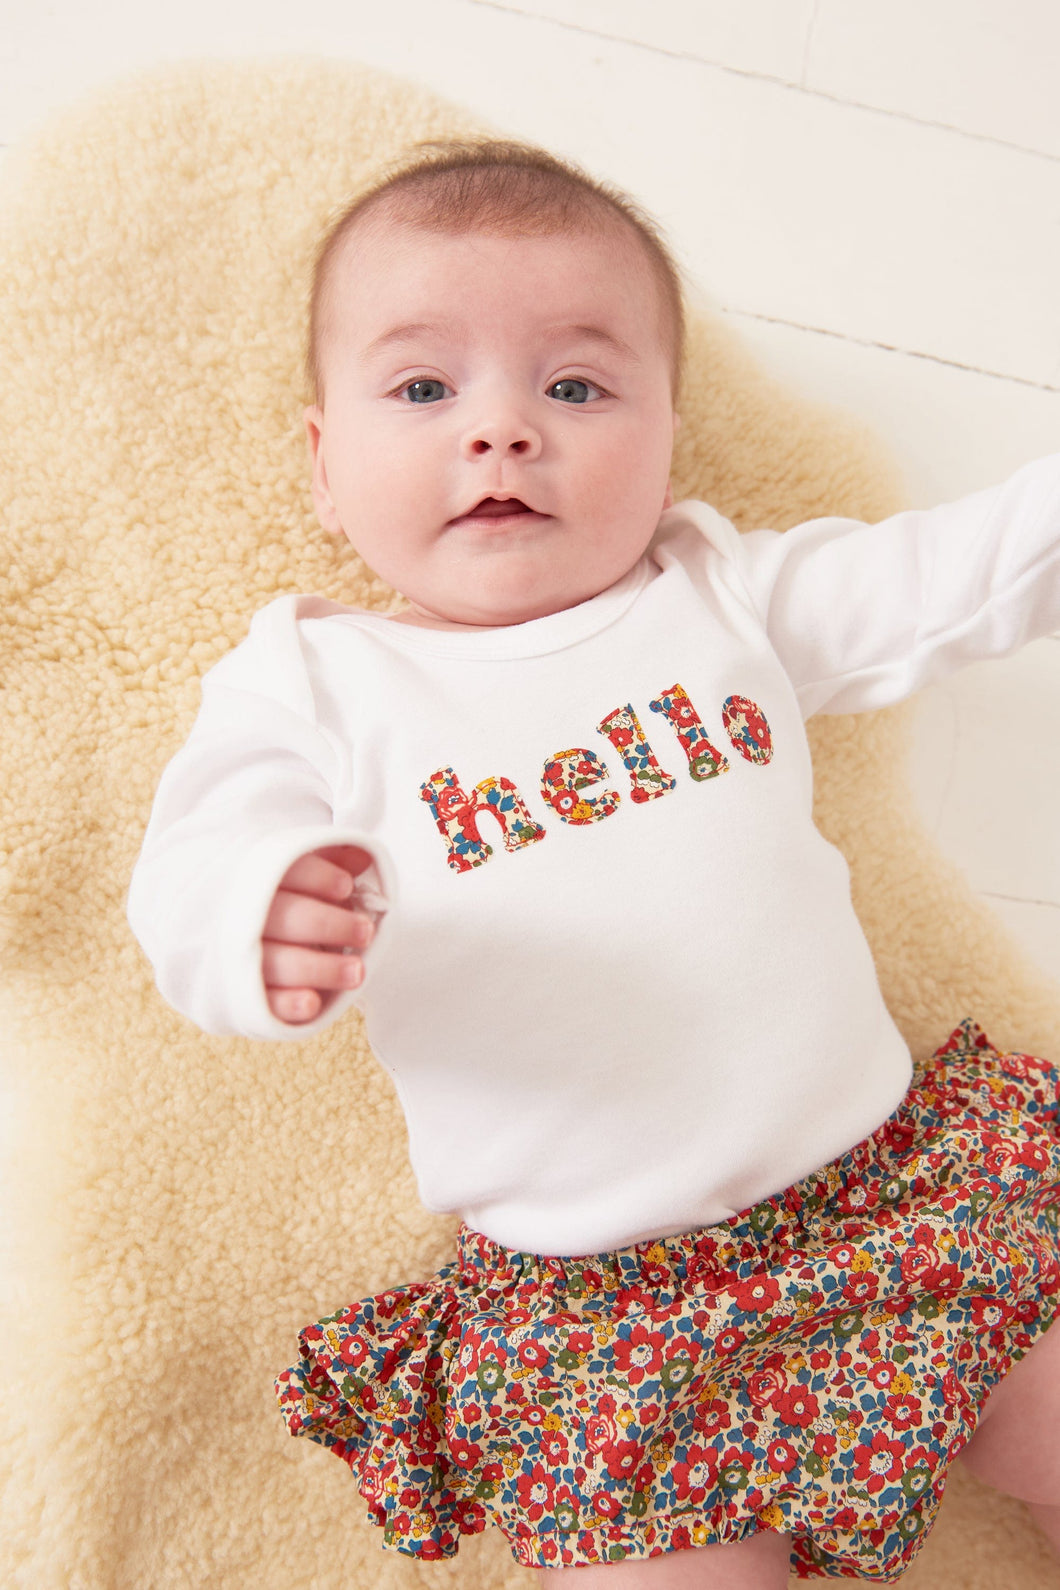 Magnificent Stanley Bodysuit 'hello' Bodysuit in choice of Liberty Print